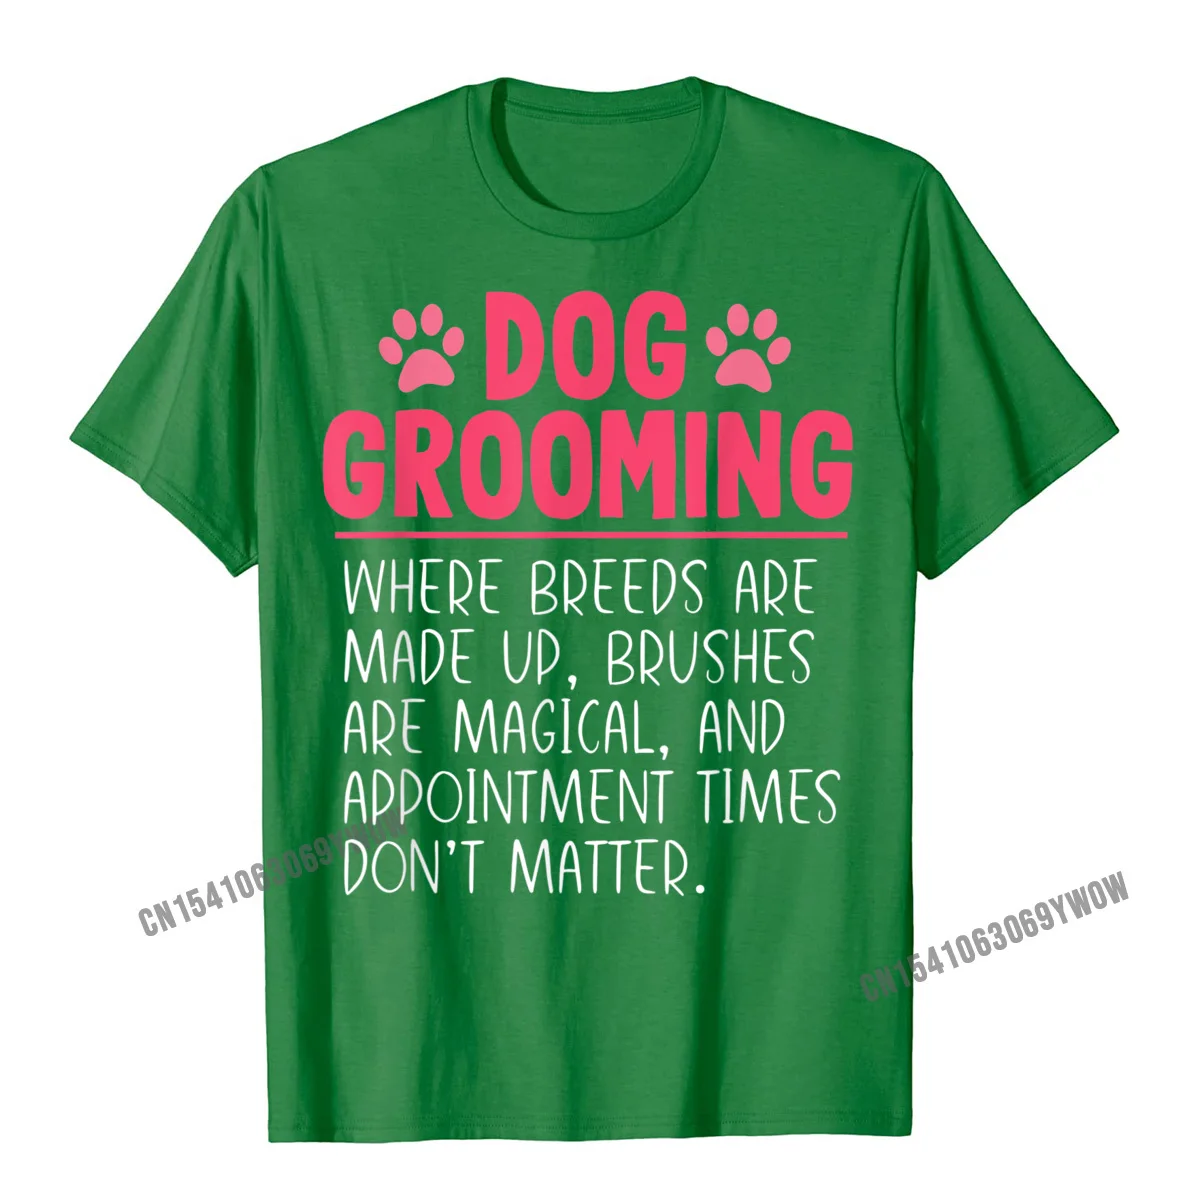 Casual Printed On Tops Shirts for Men 2021 Labor Day Round Neck All Cotton Short Sleeve T-shirts Crazy Tshirts Dog Groomer Funny Breeds Joke Pet Grooming Puppy Care Gift T-Shirt__591 green